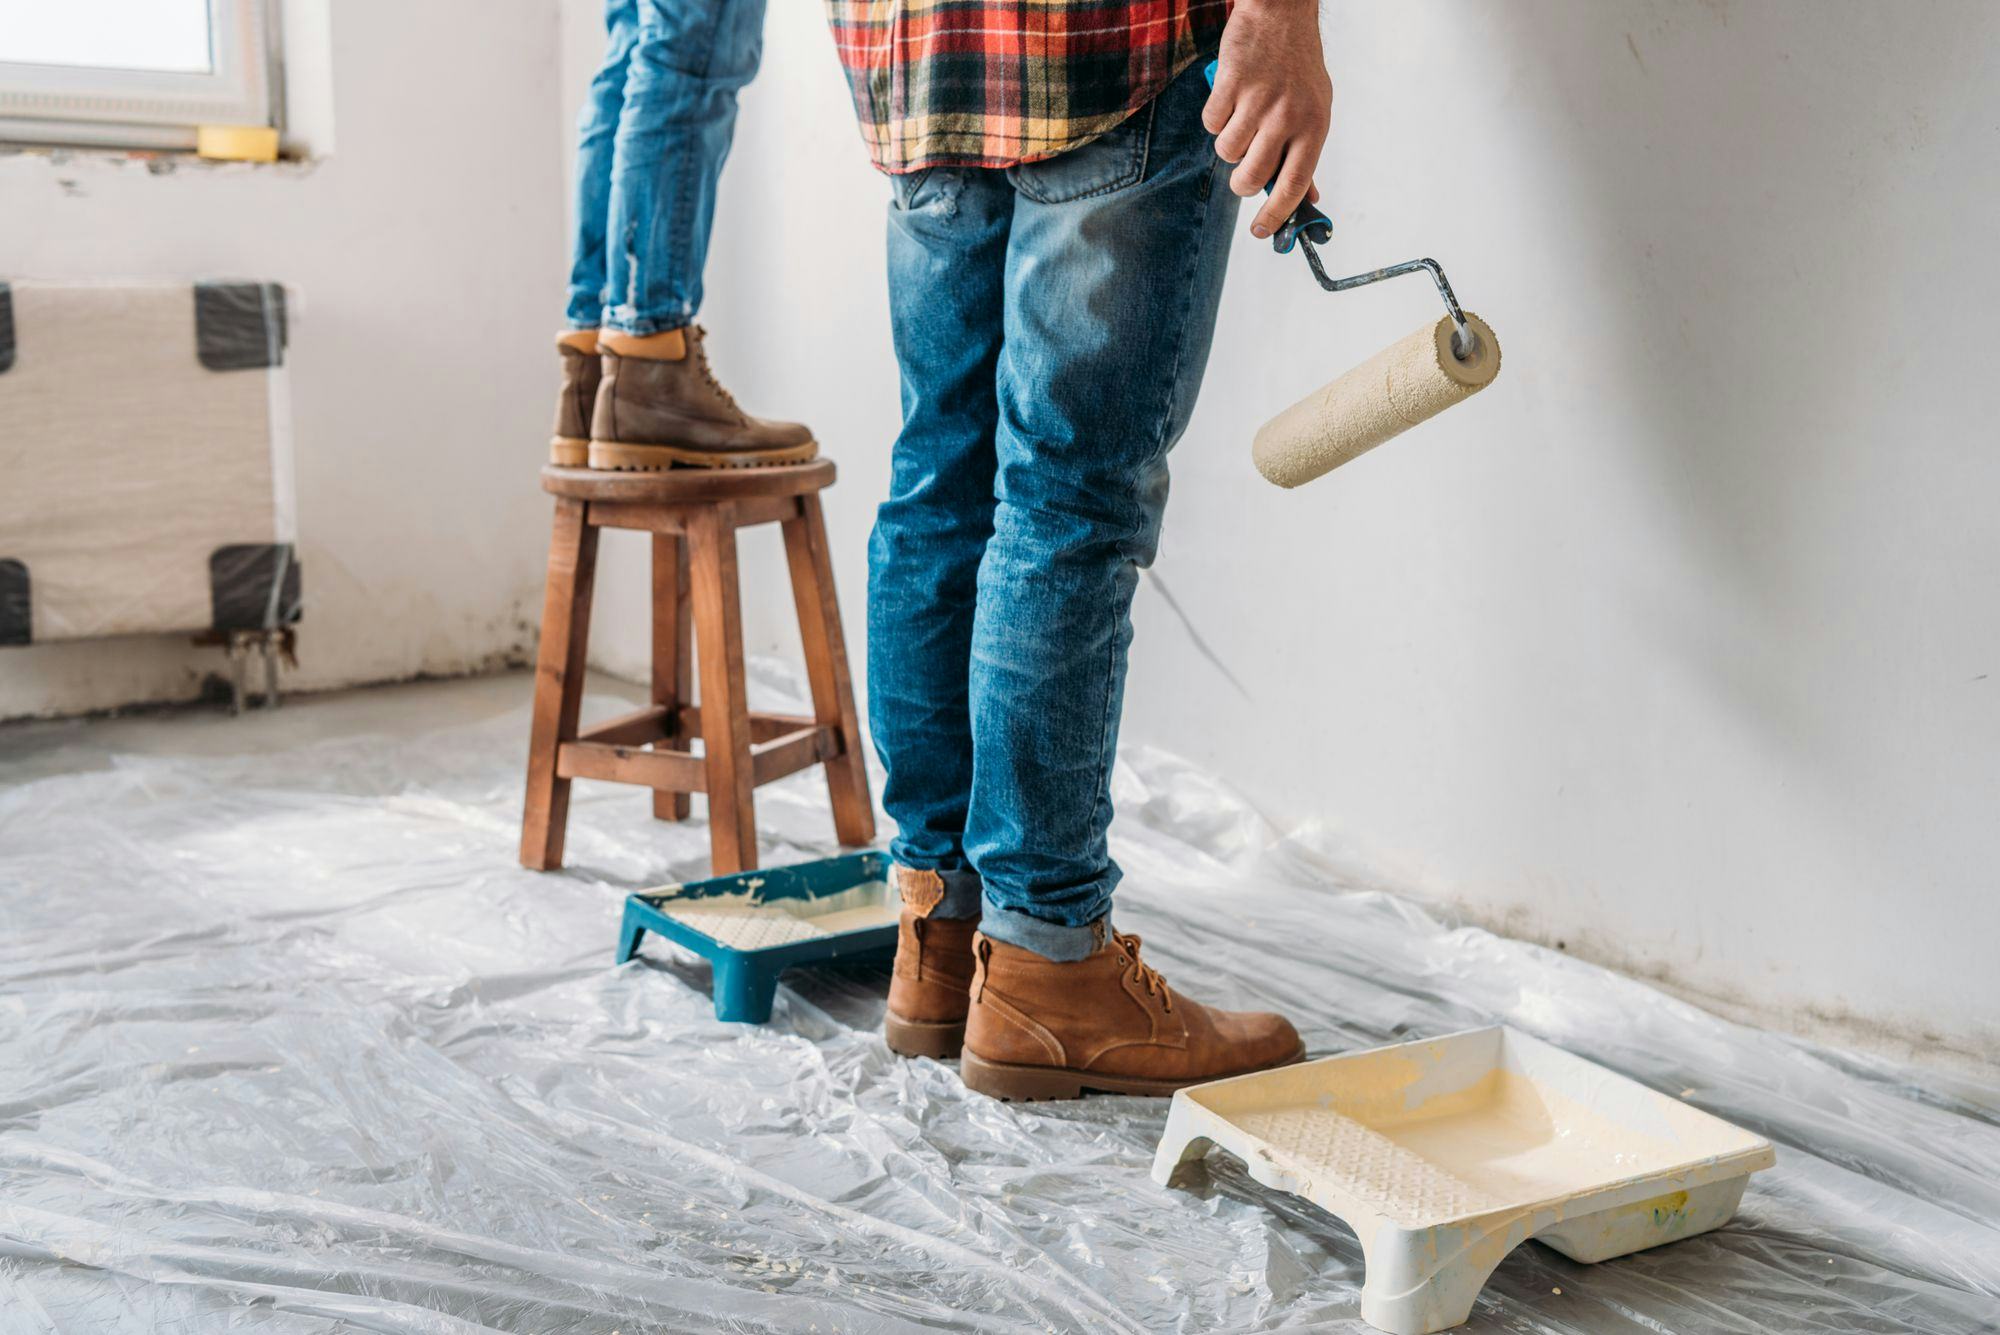 Best loans for homeowners who want to do home improvement